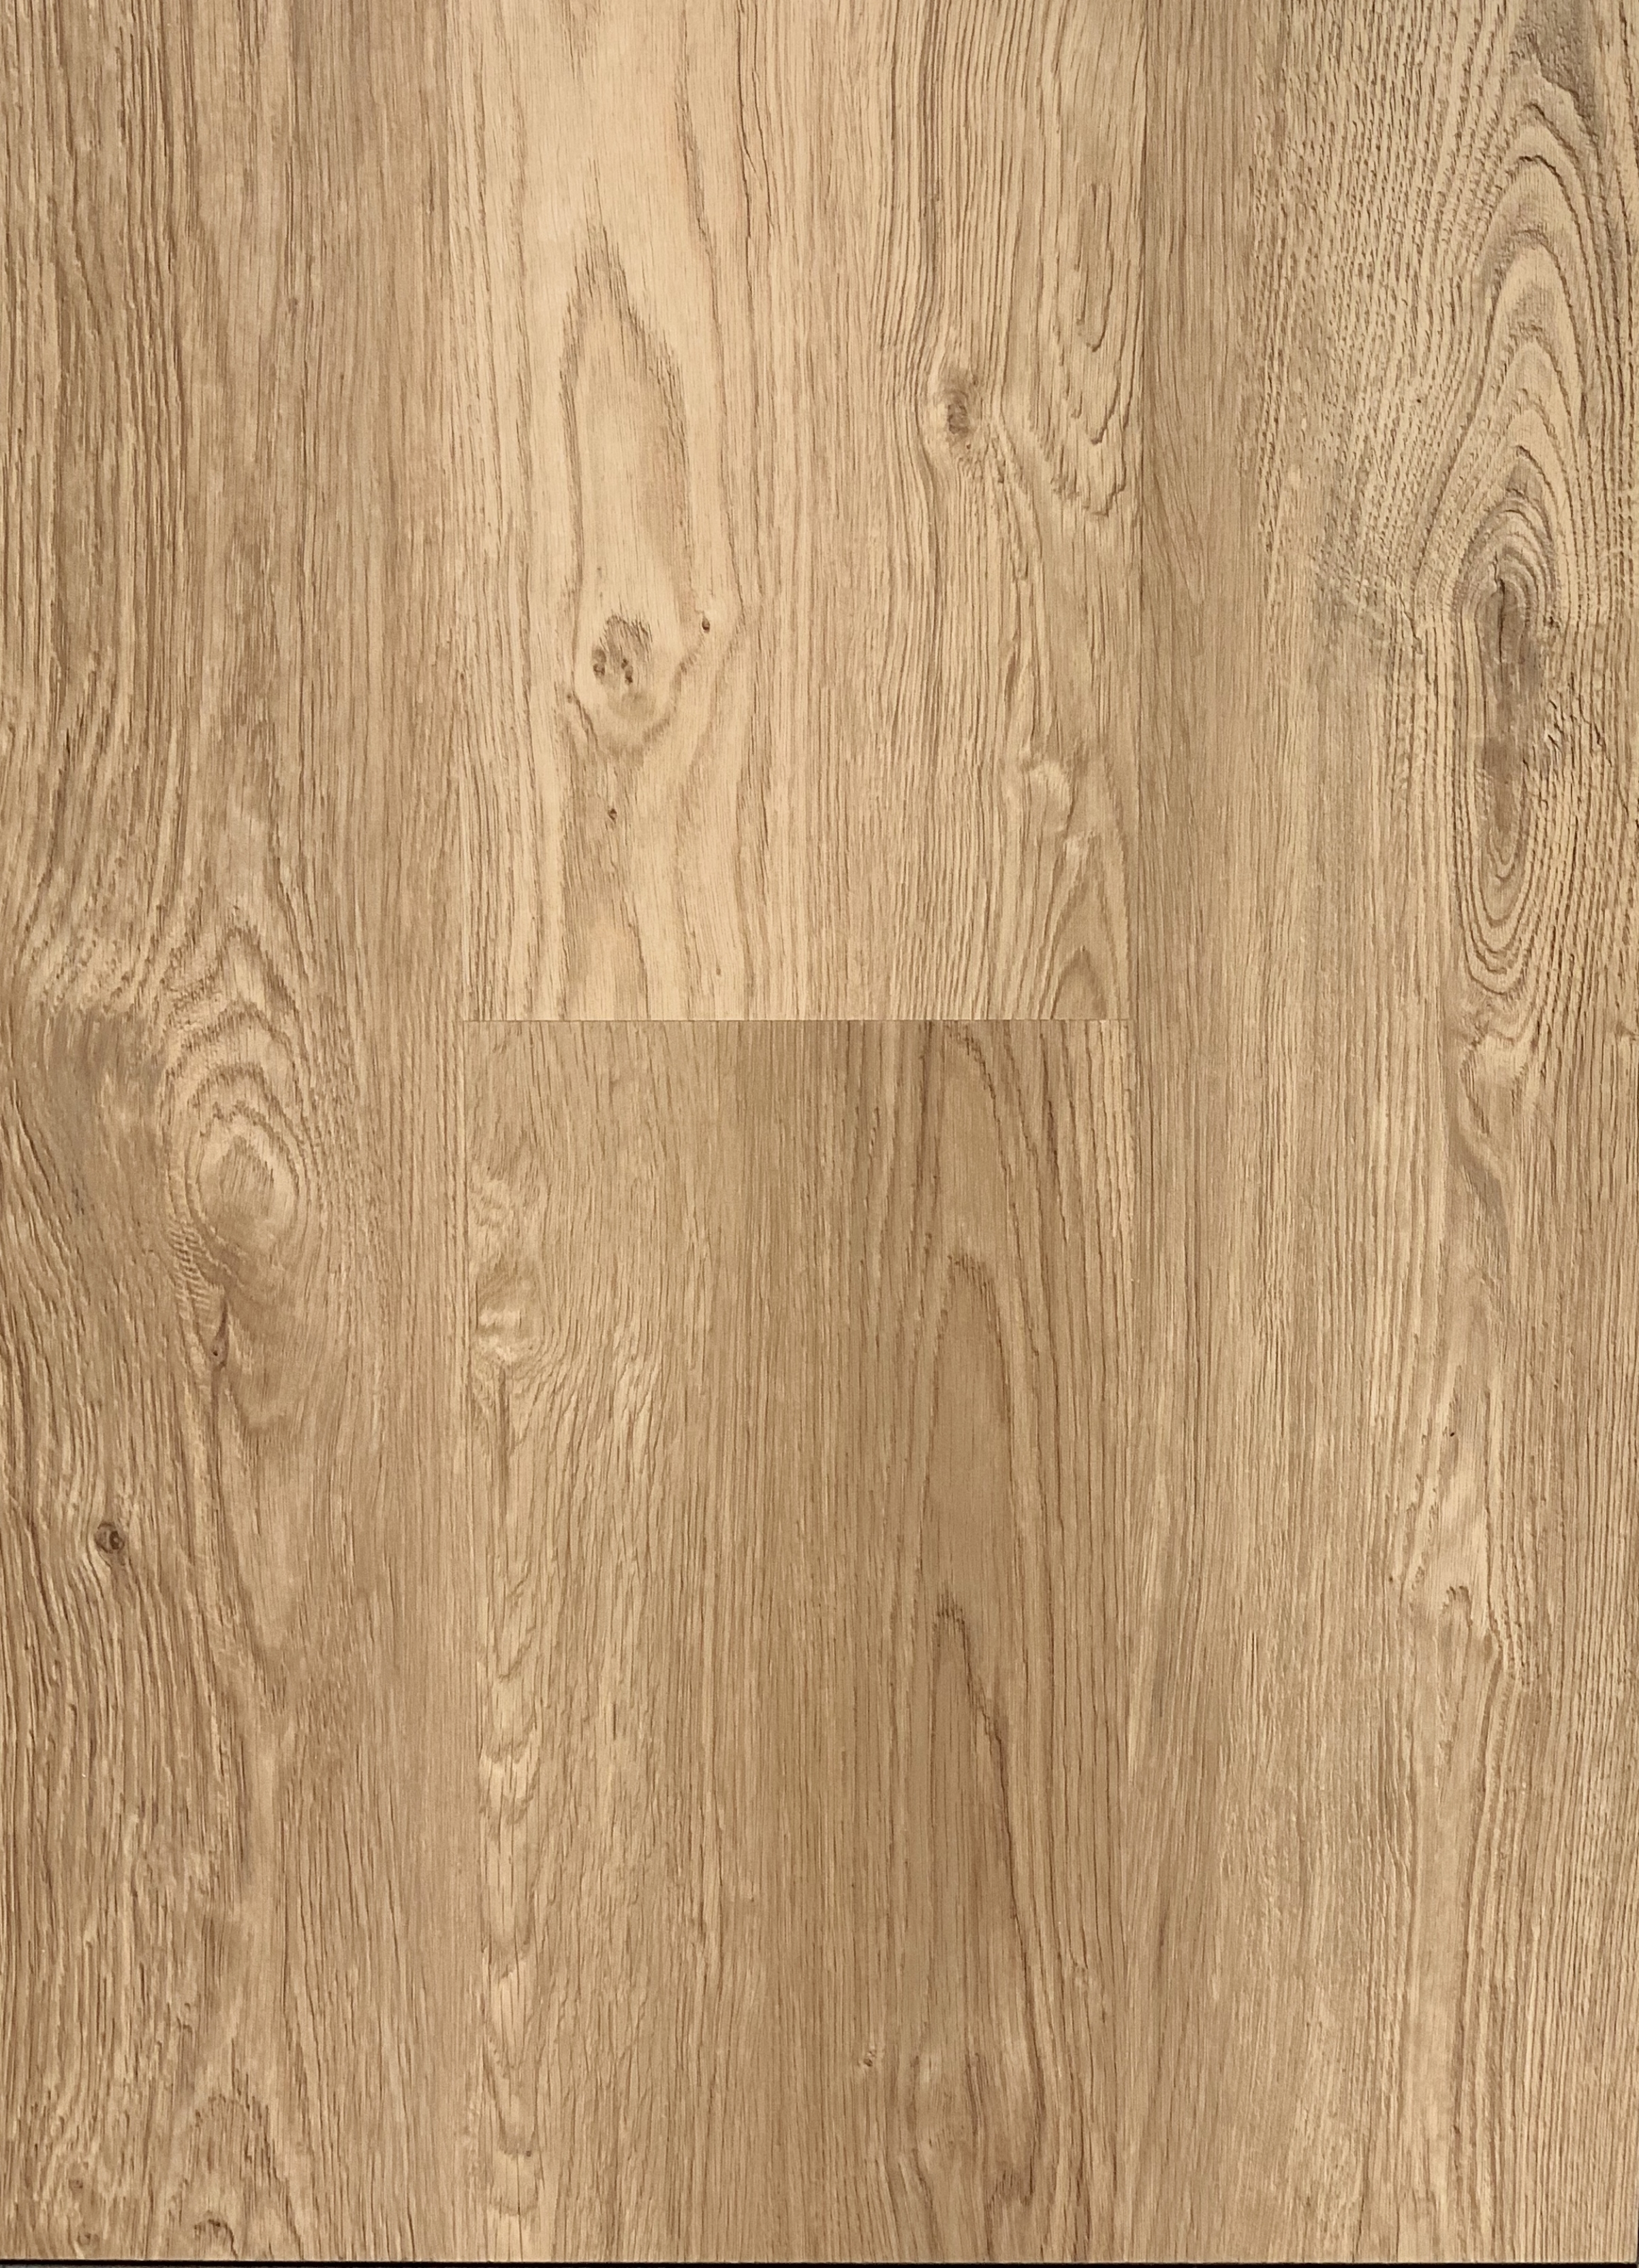 Hybrid flooring suppliers Natural oak product